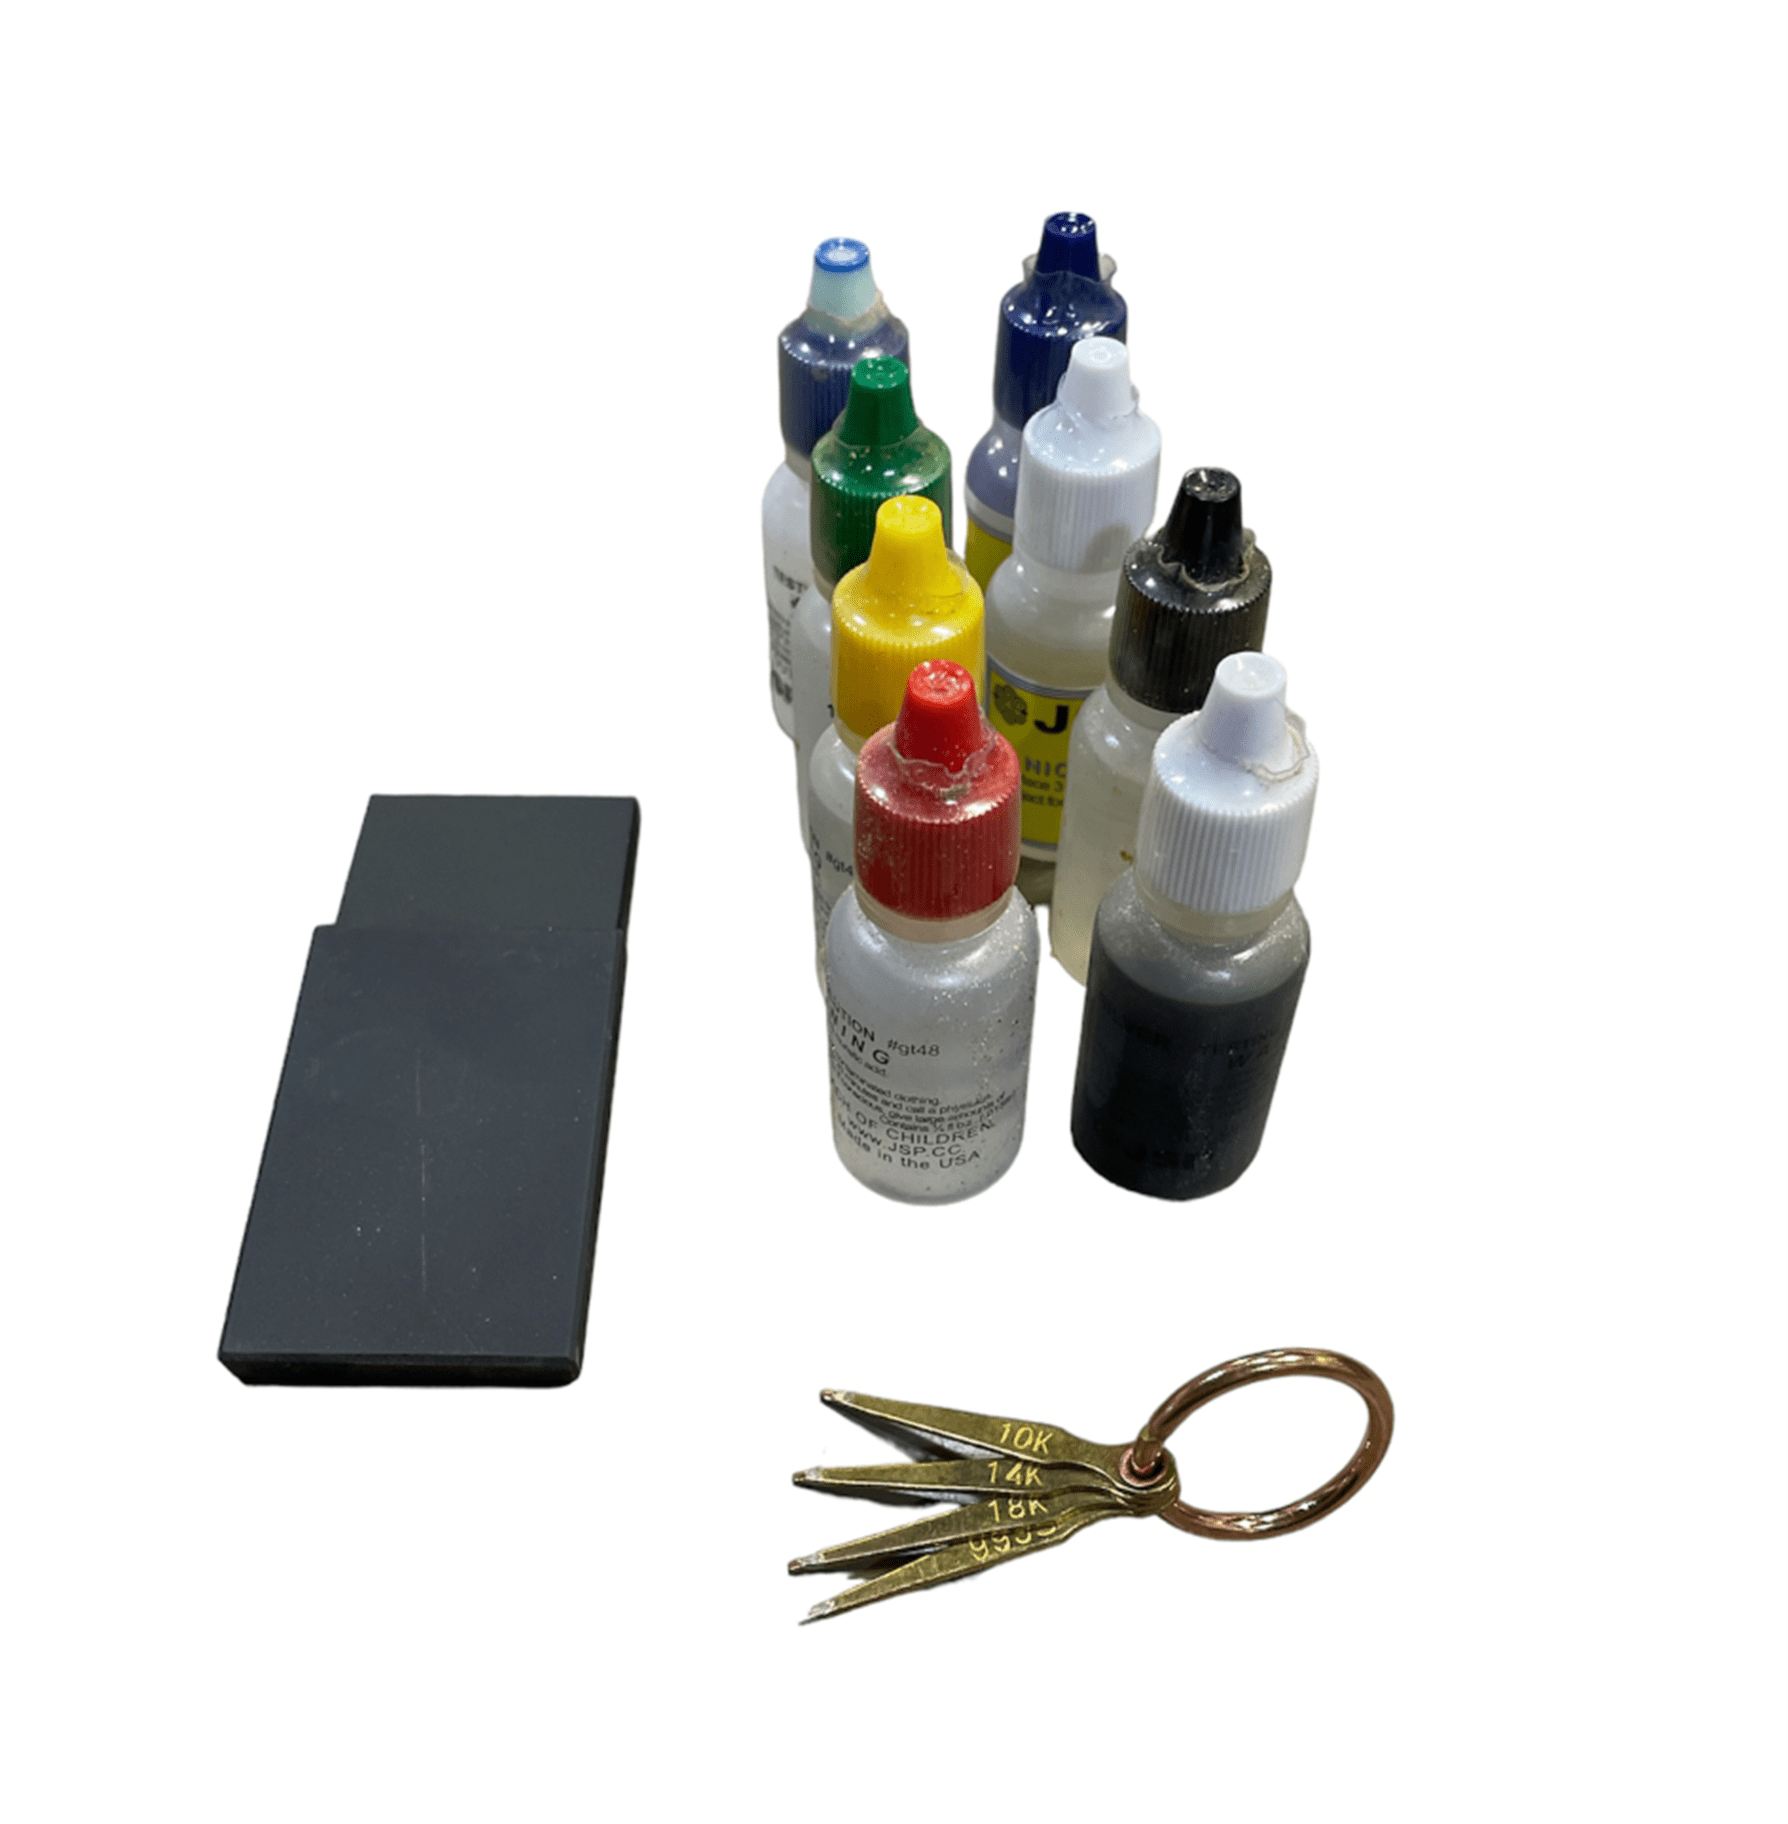 Complete Precious Metal Testing Solution Kit with Gold Test Needle, Acid Neutralizer for Gold, Platinum, Silver and Nickel Testing